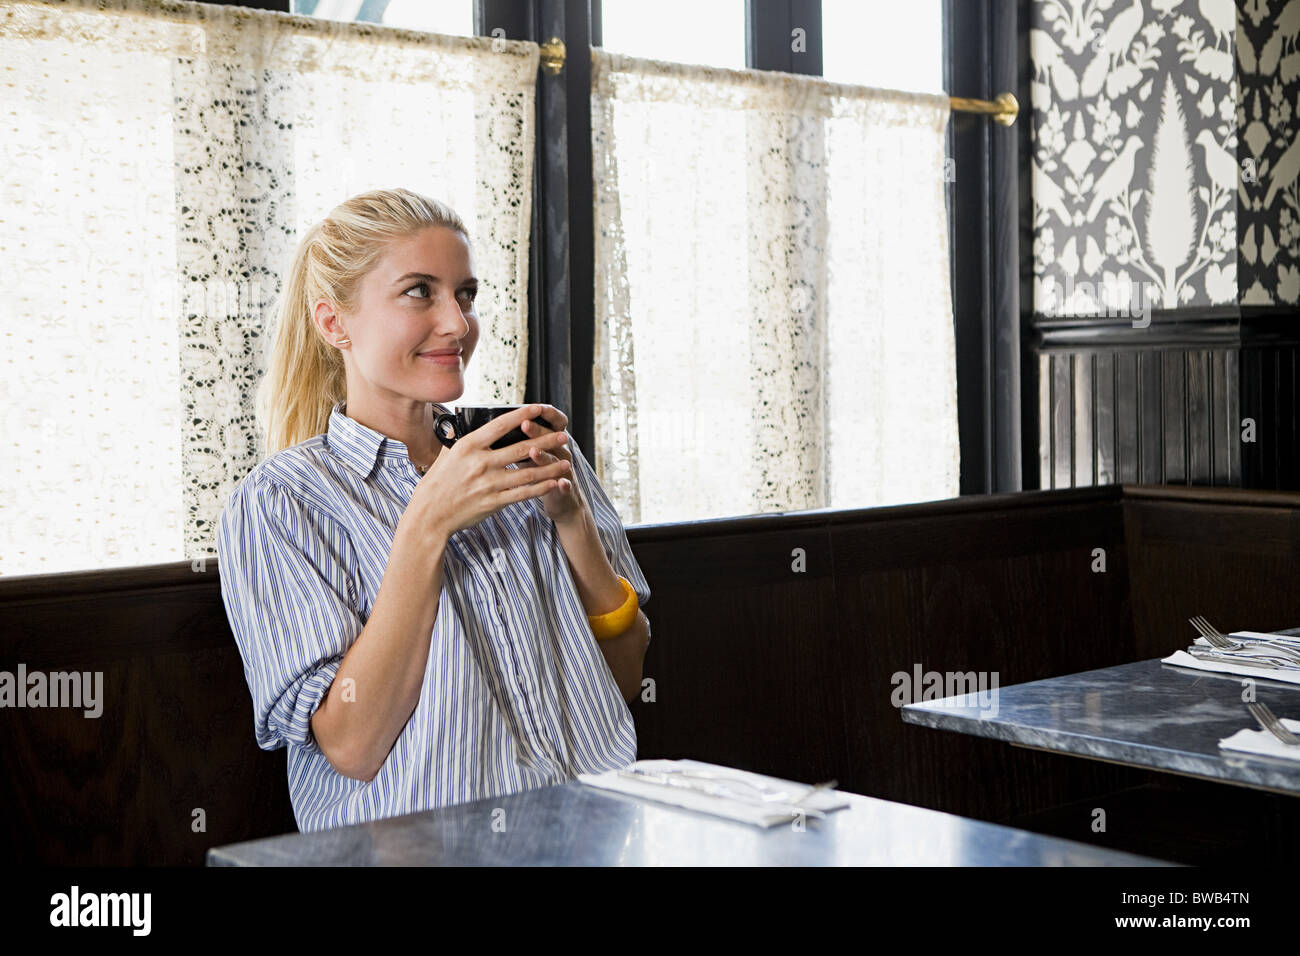 Woman having a drink at coffee shop Stock Photo